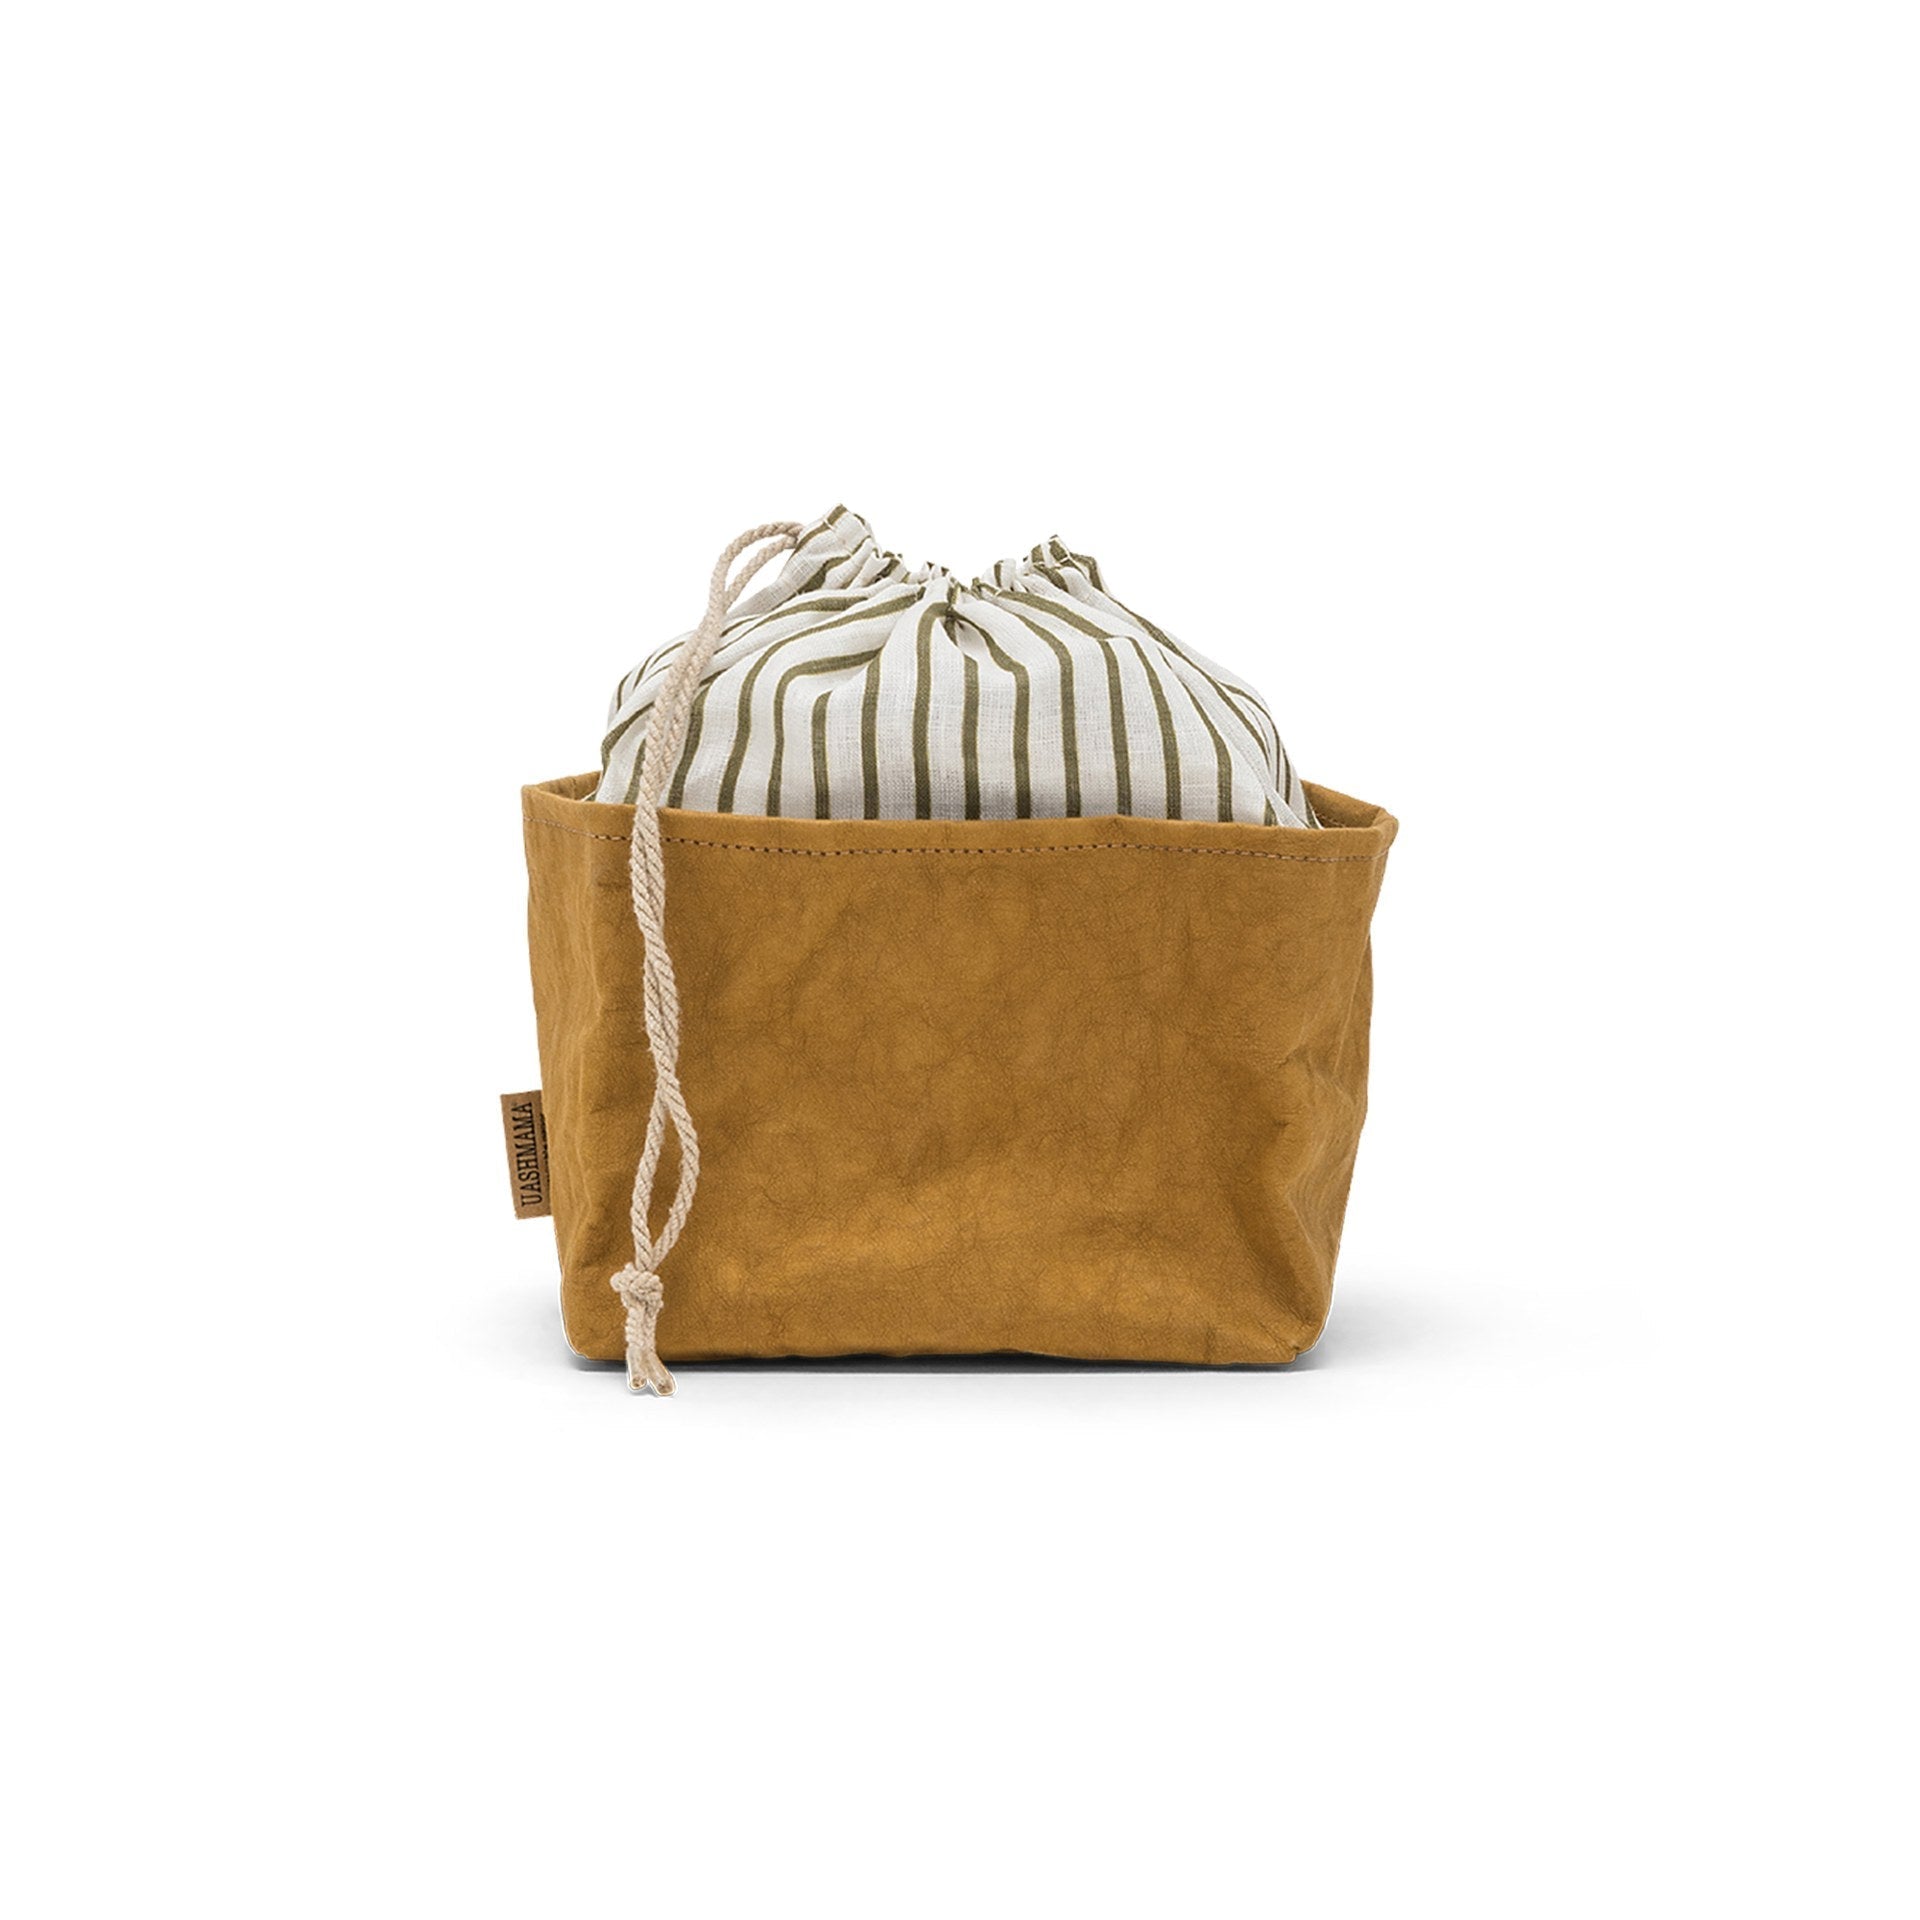 A washable paper bread bag with a drawstring organic linen top is shown. The bag has a small UASHMAMA logo label on the left hand side and fastens with a beige cord drawstring. The bag is tan in colour with an olive and cream cotton drawstring top.